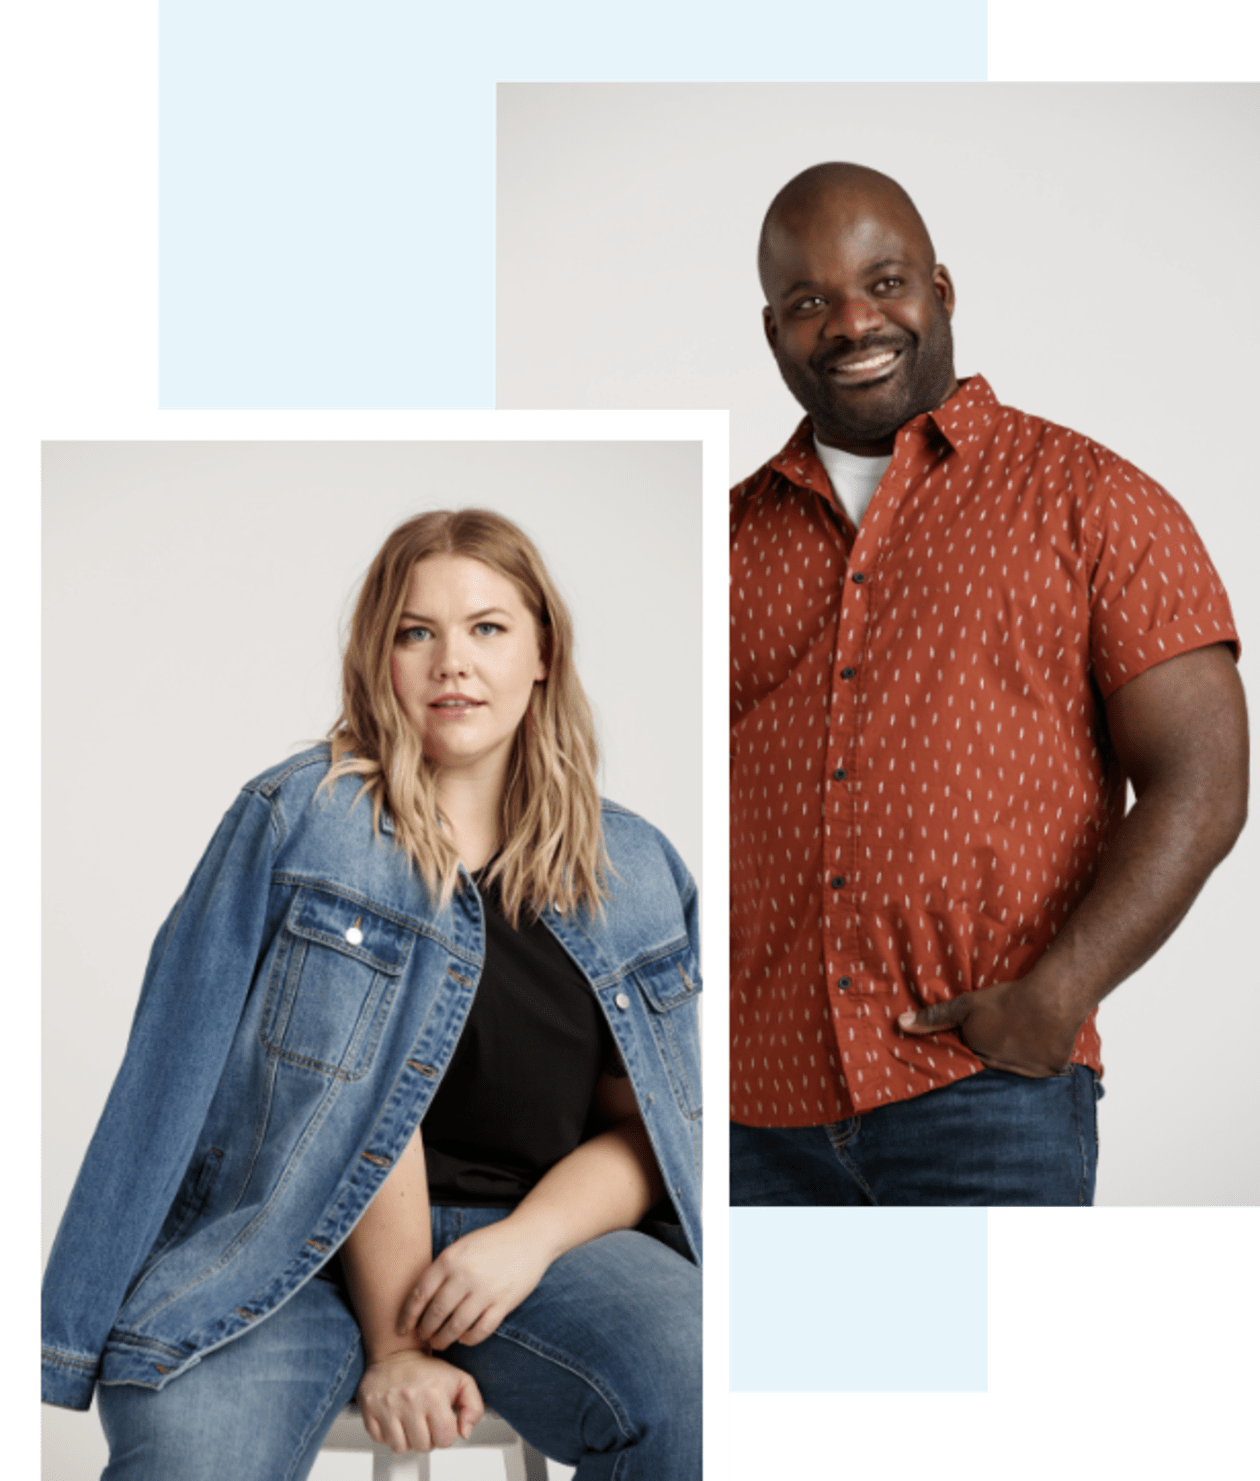 Women's Plus & Men's Extended Size Clothing Collection